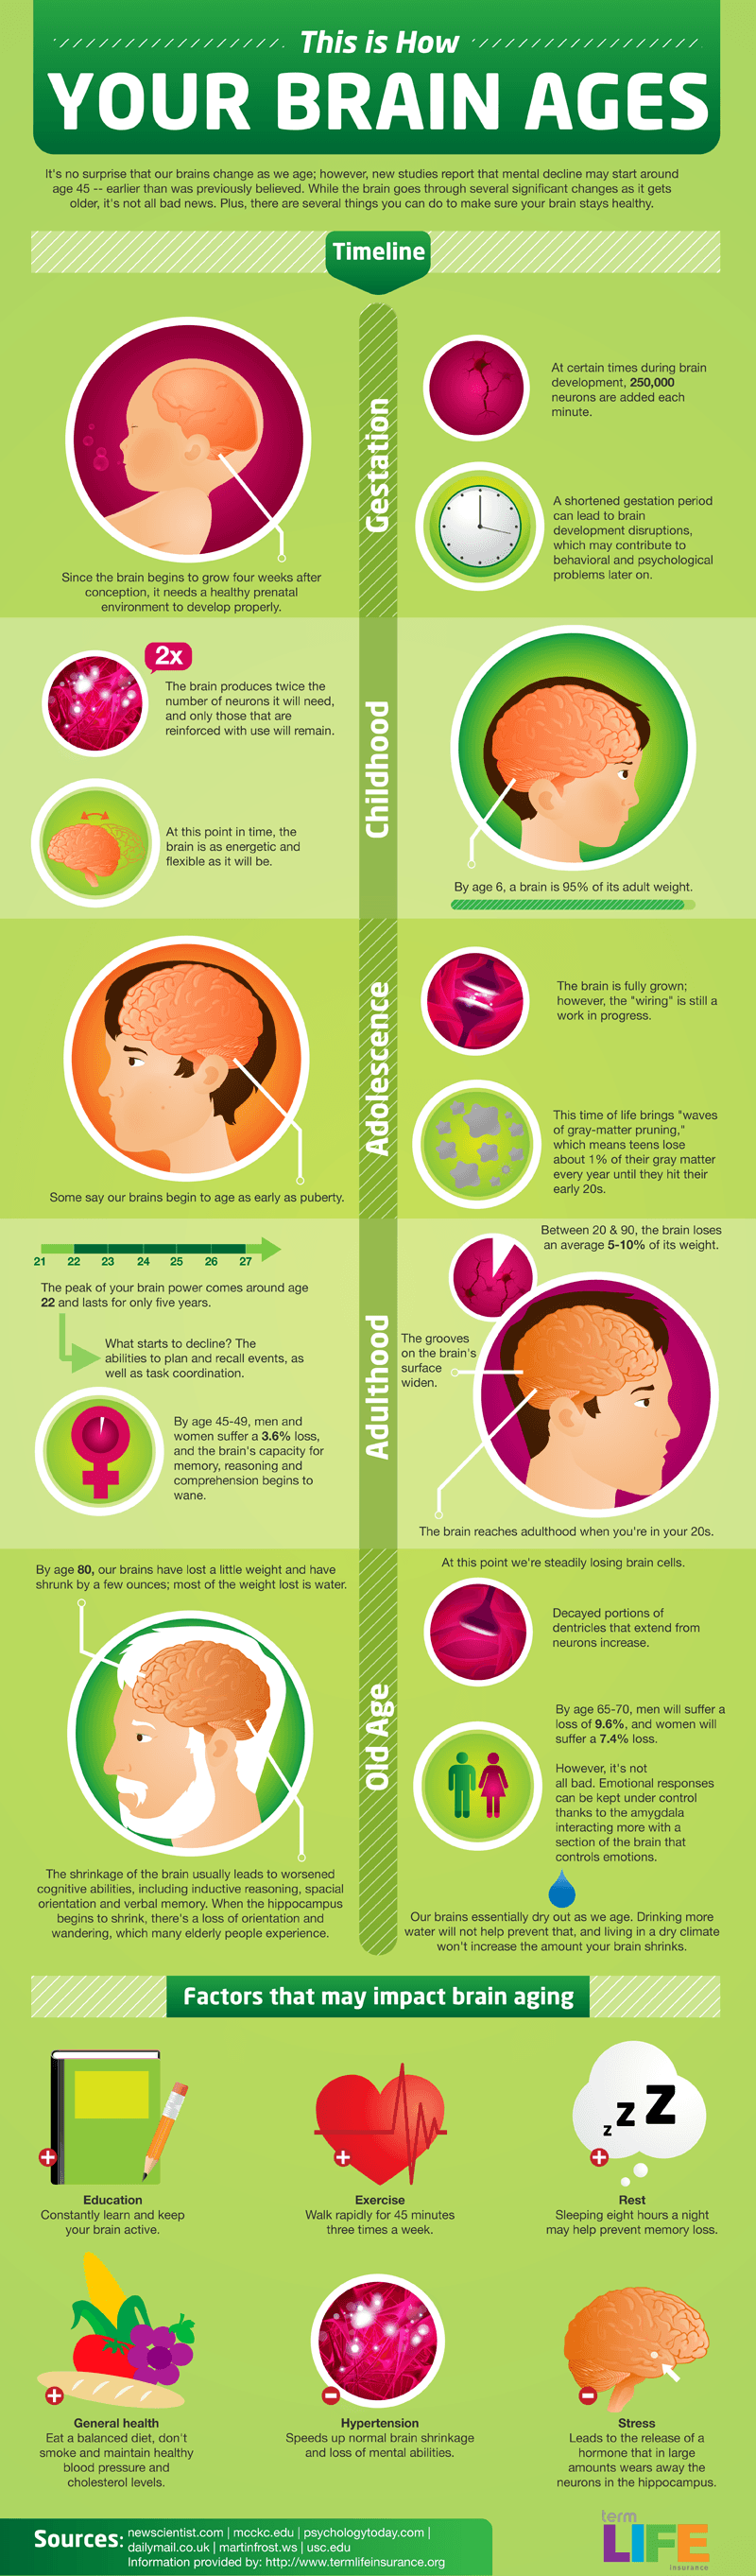 How Your Brain Ages Infographic